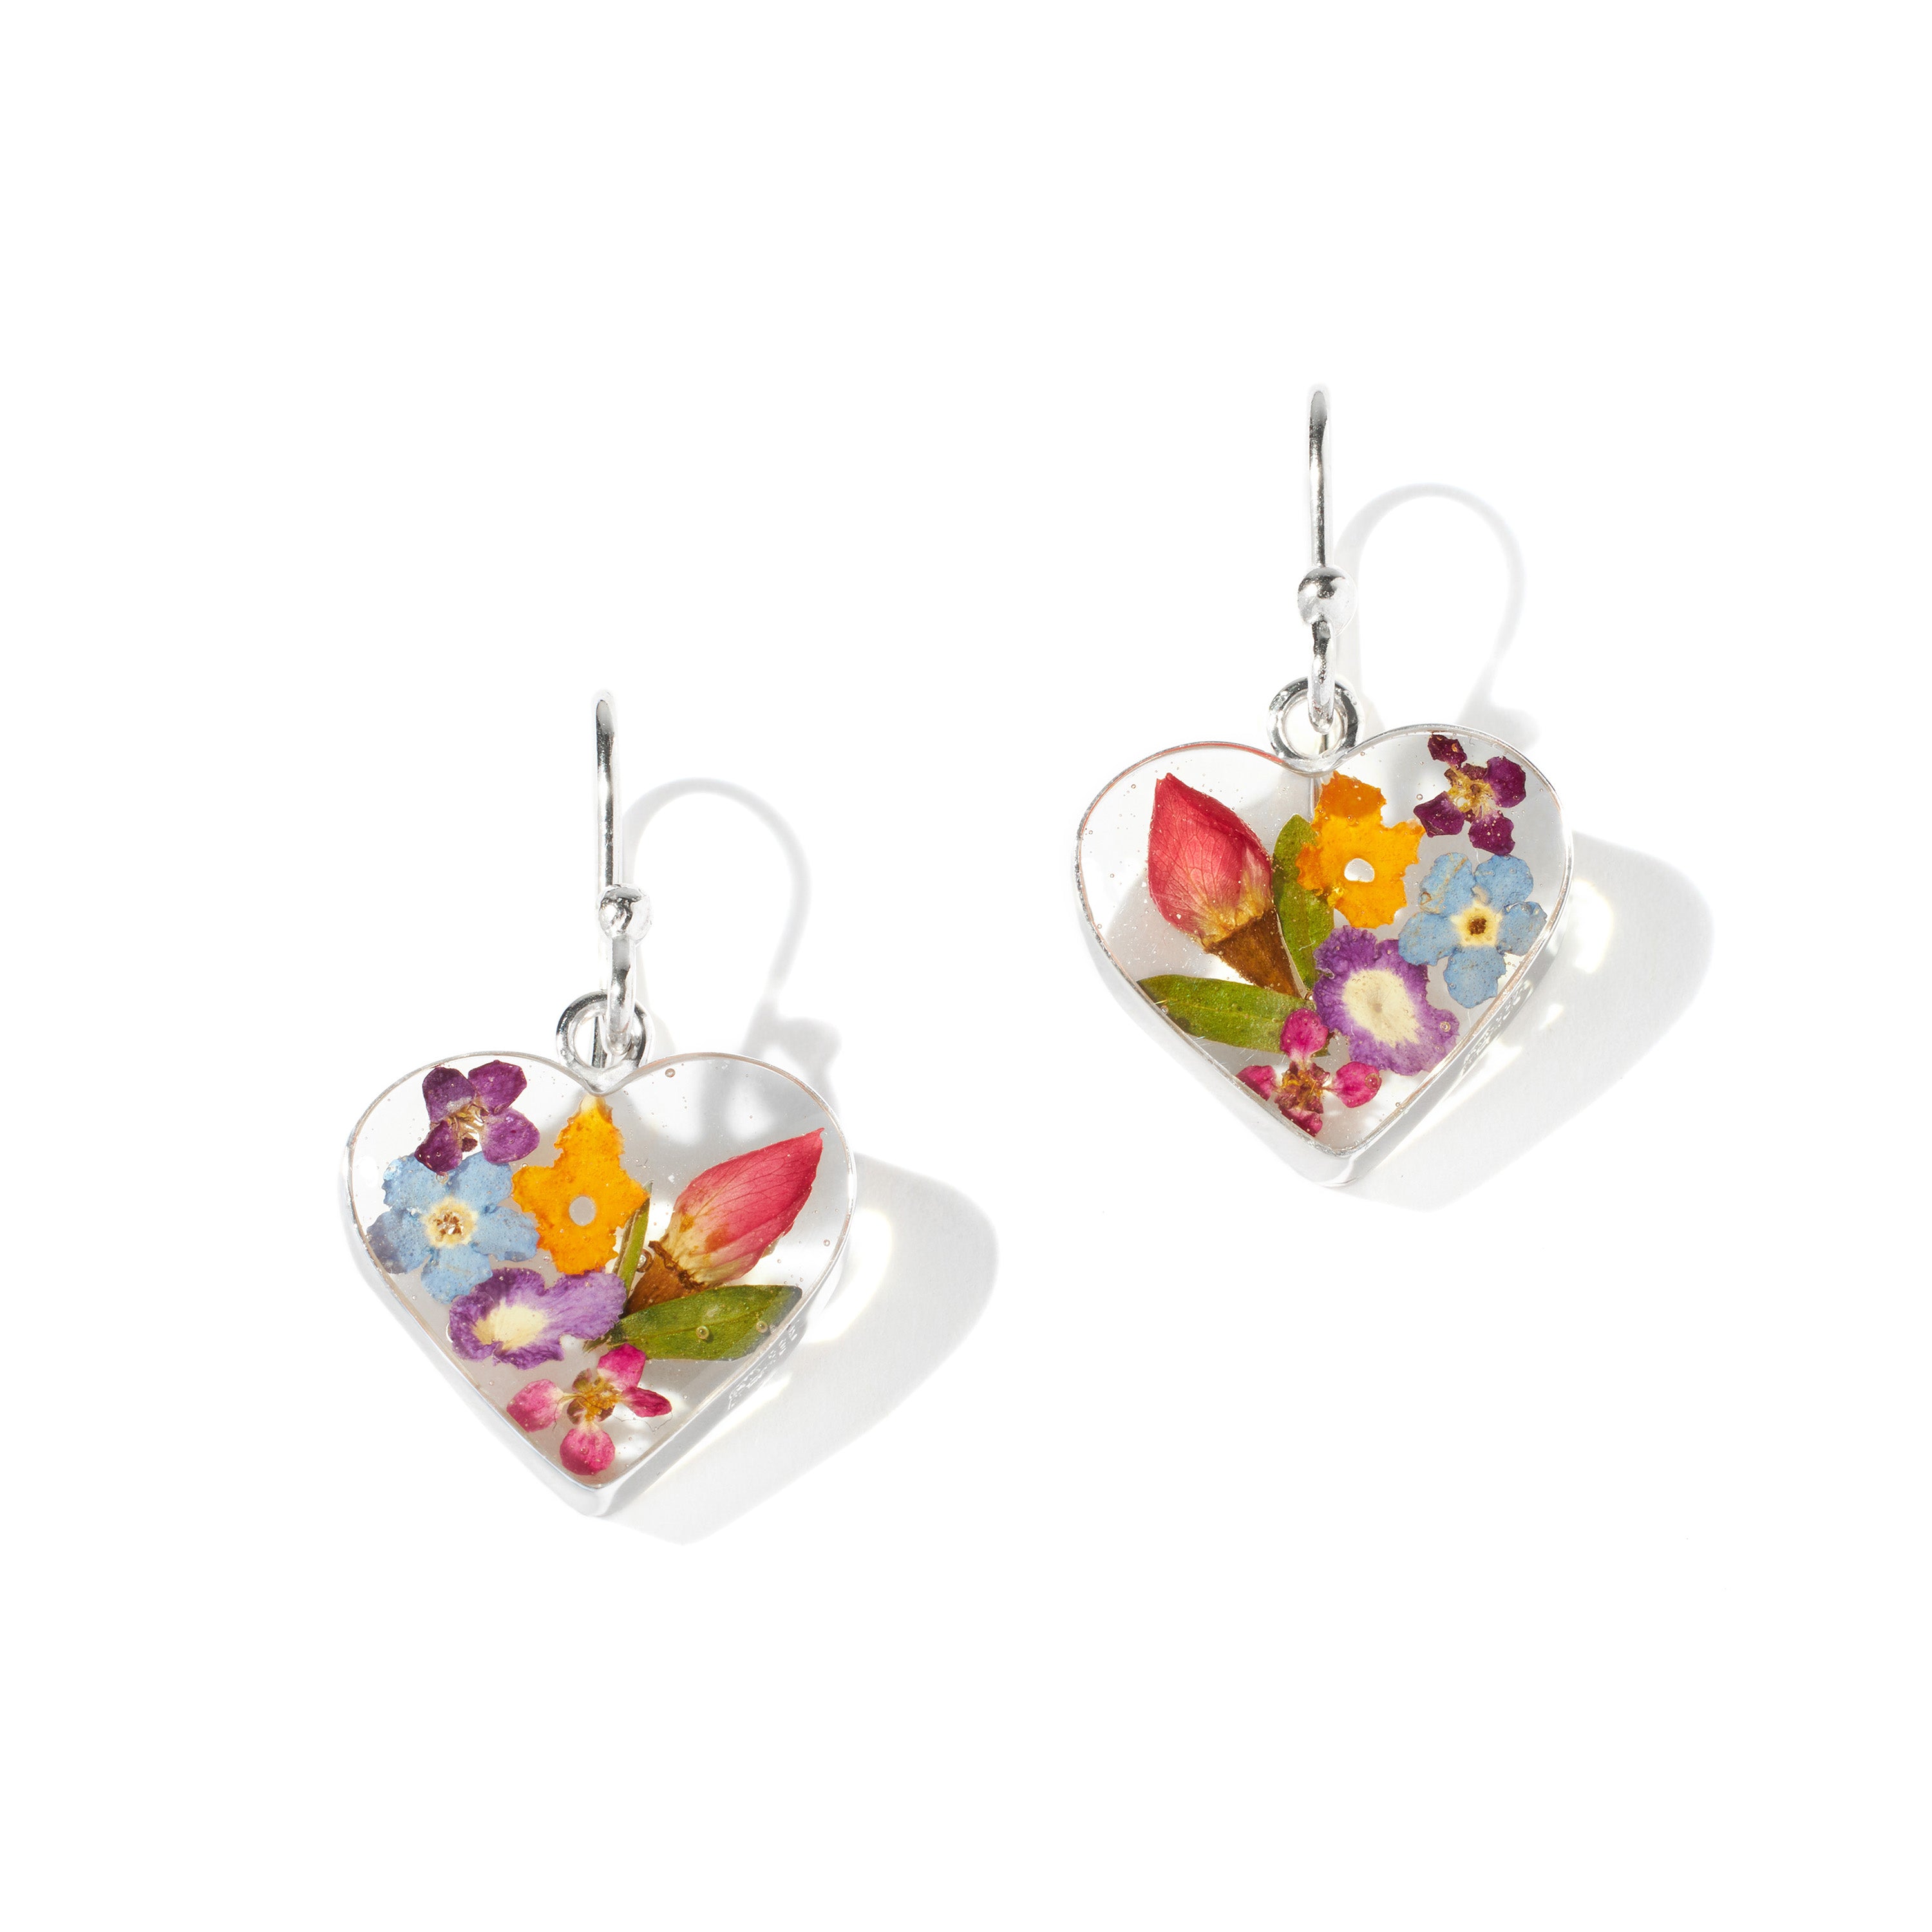 Alma Heart Earrings with Multi Colored Flowers